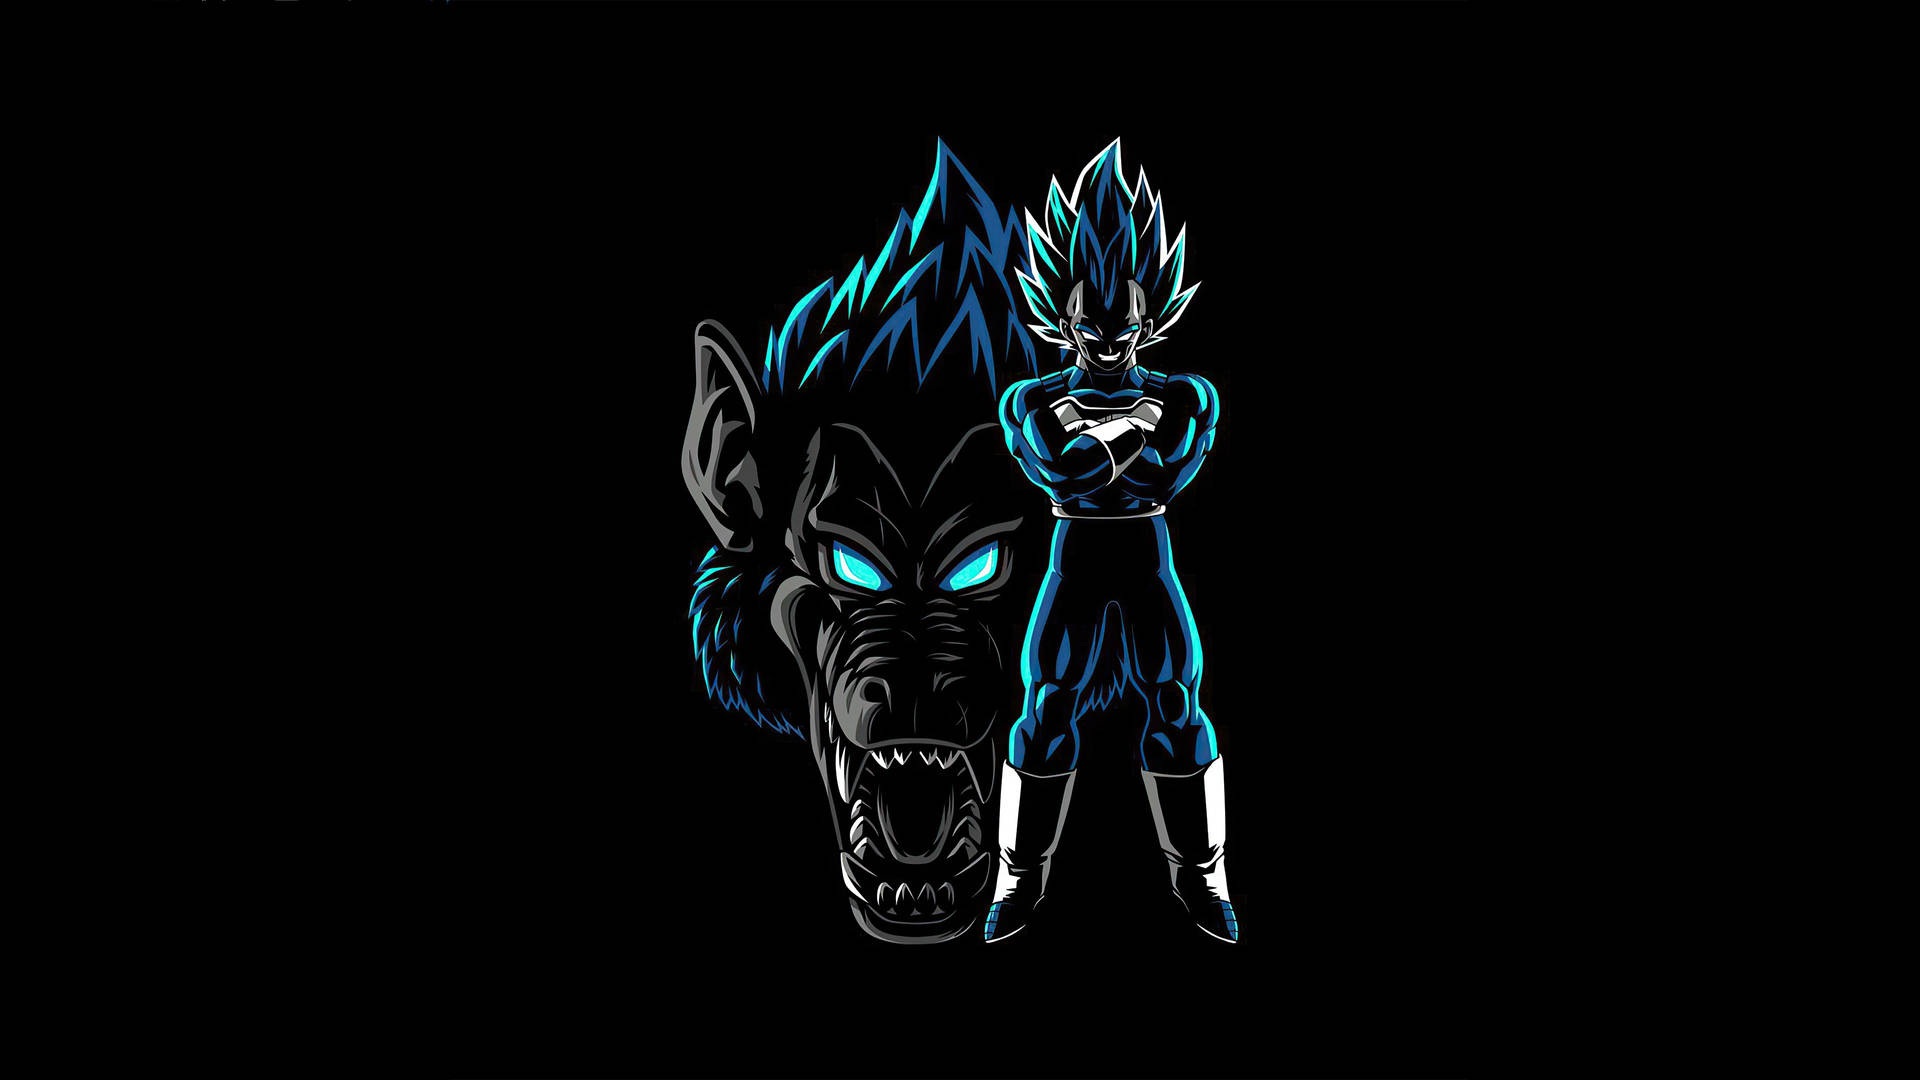 Vegeta 3840X2160 Wallpaper and Background Image